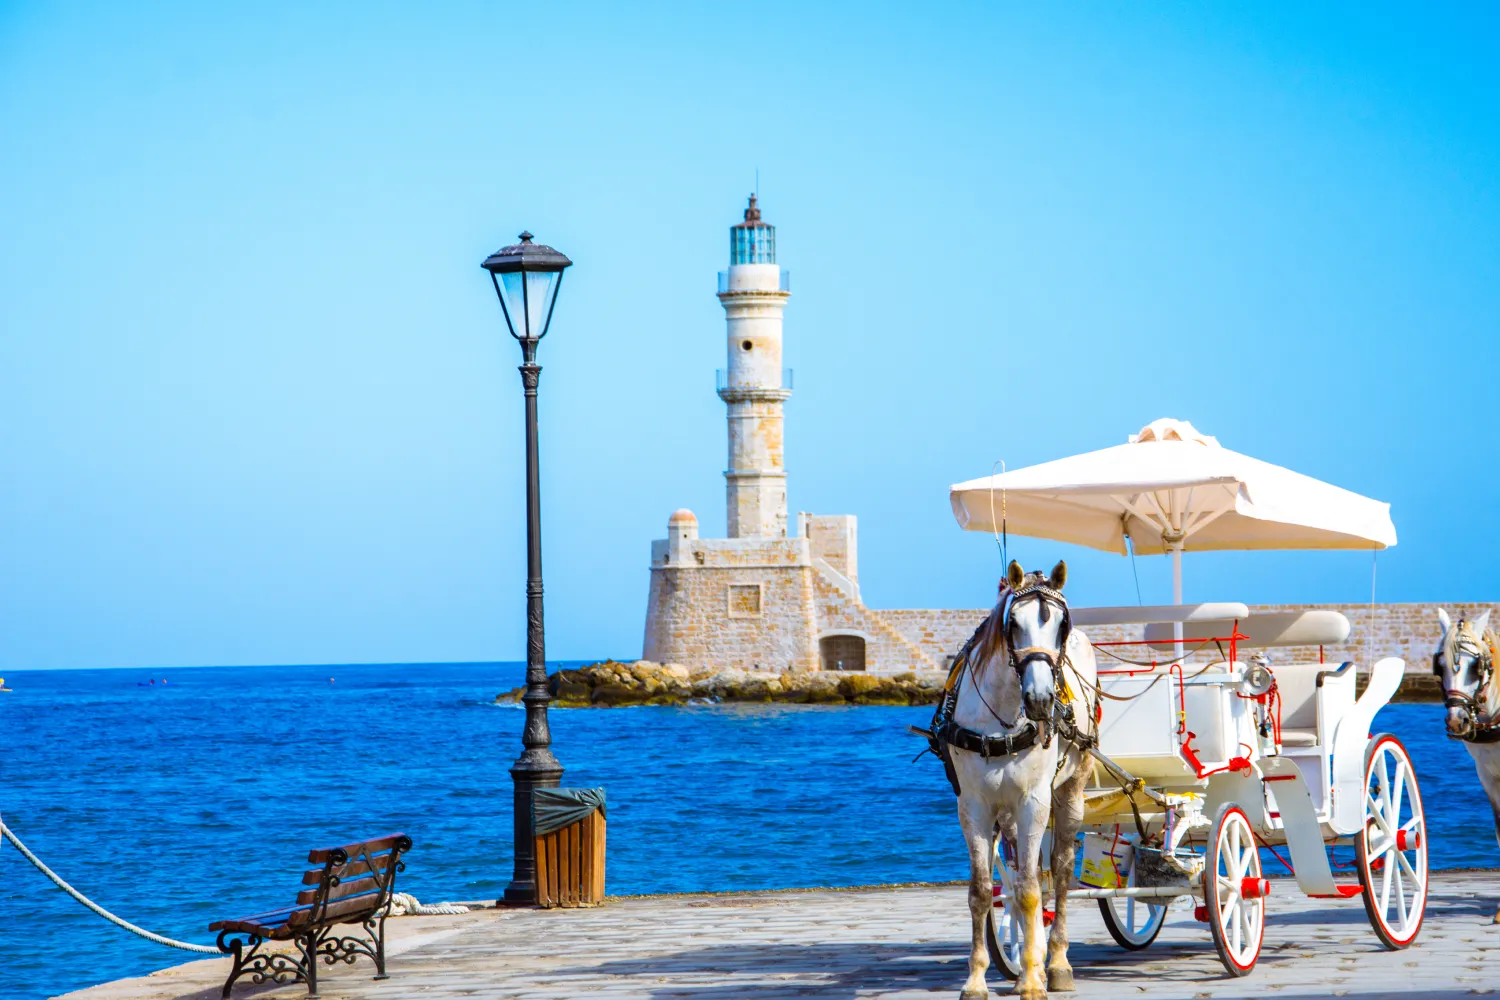 Chania The Old Harbor Of Chania With Horse Carriages And Lighthouse, Crete, Greece 1 image